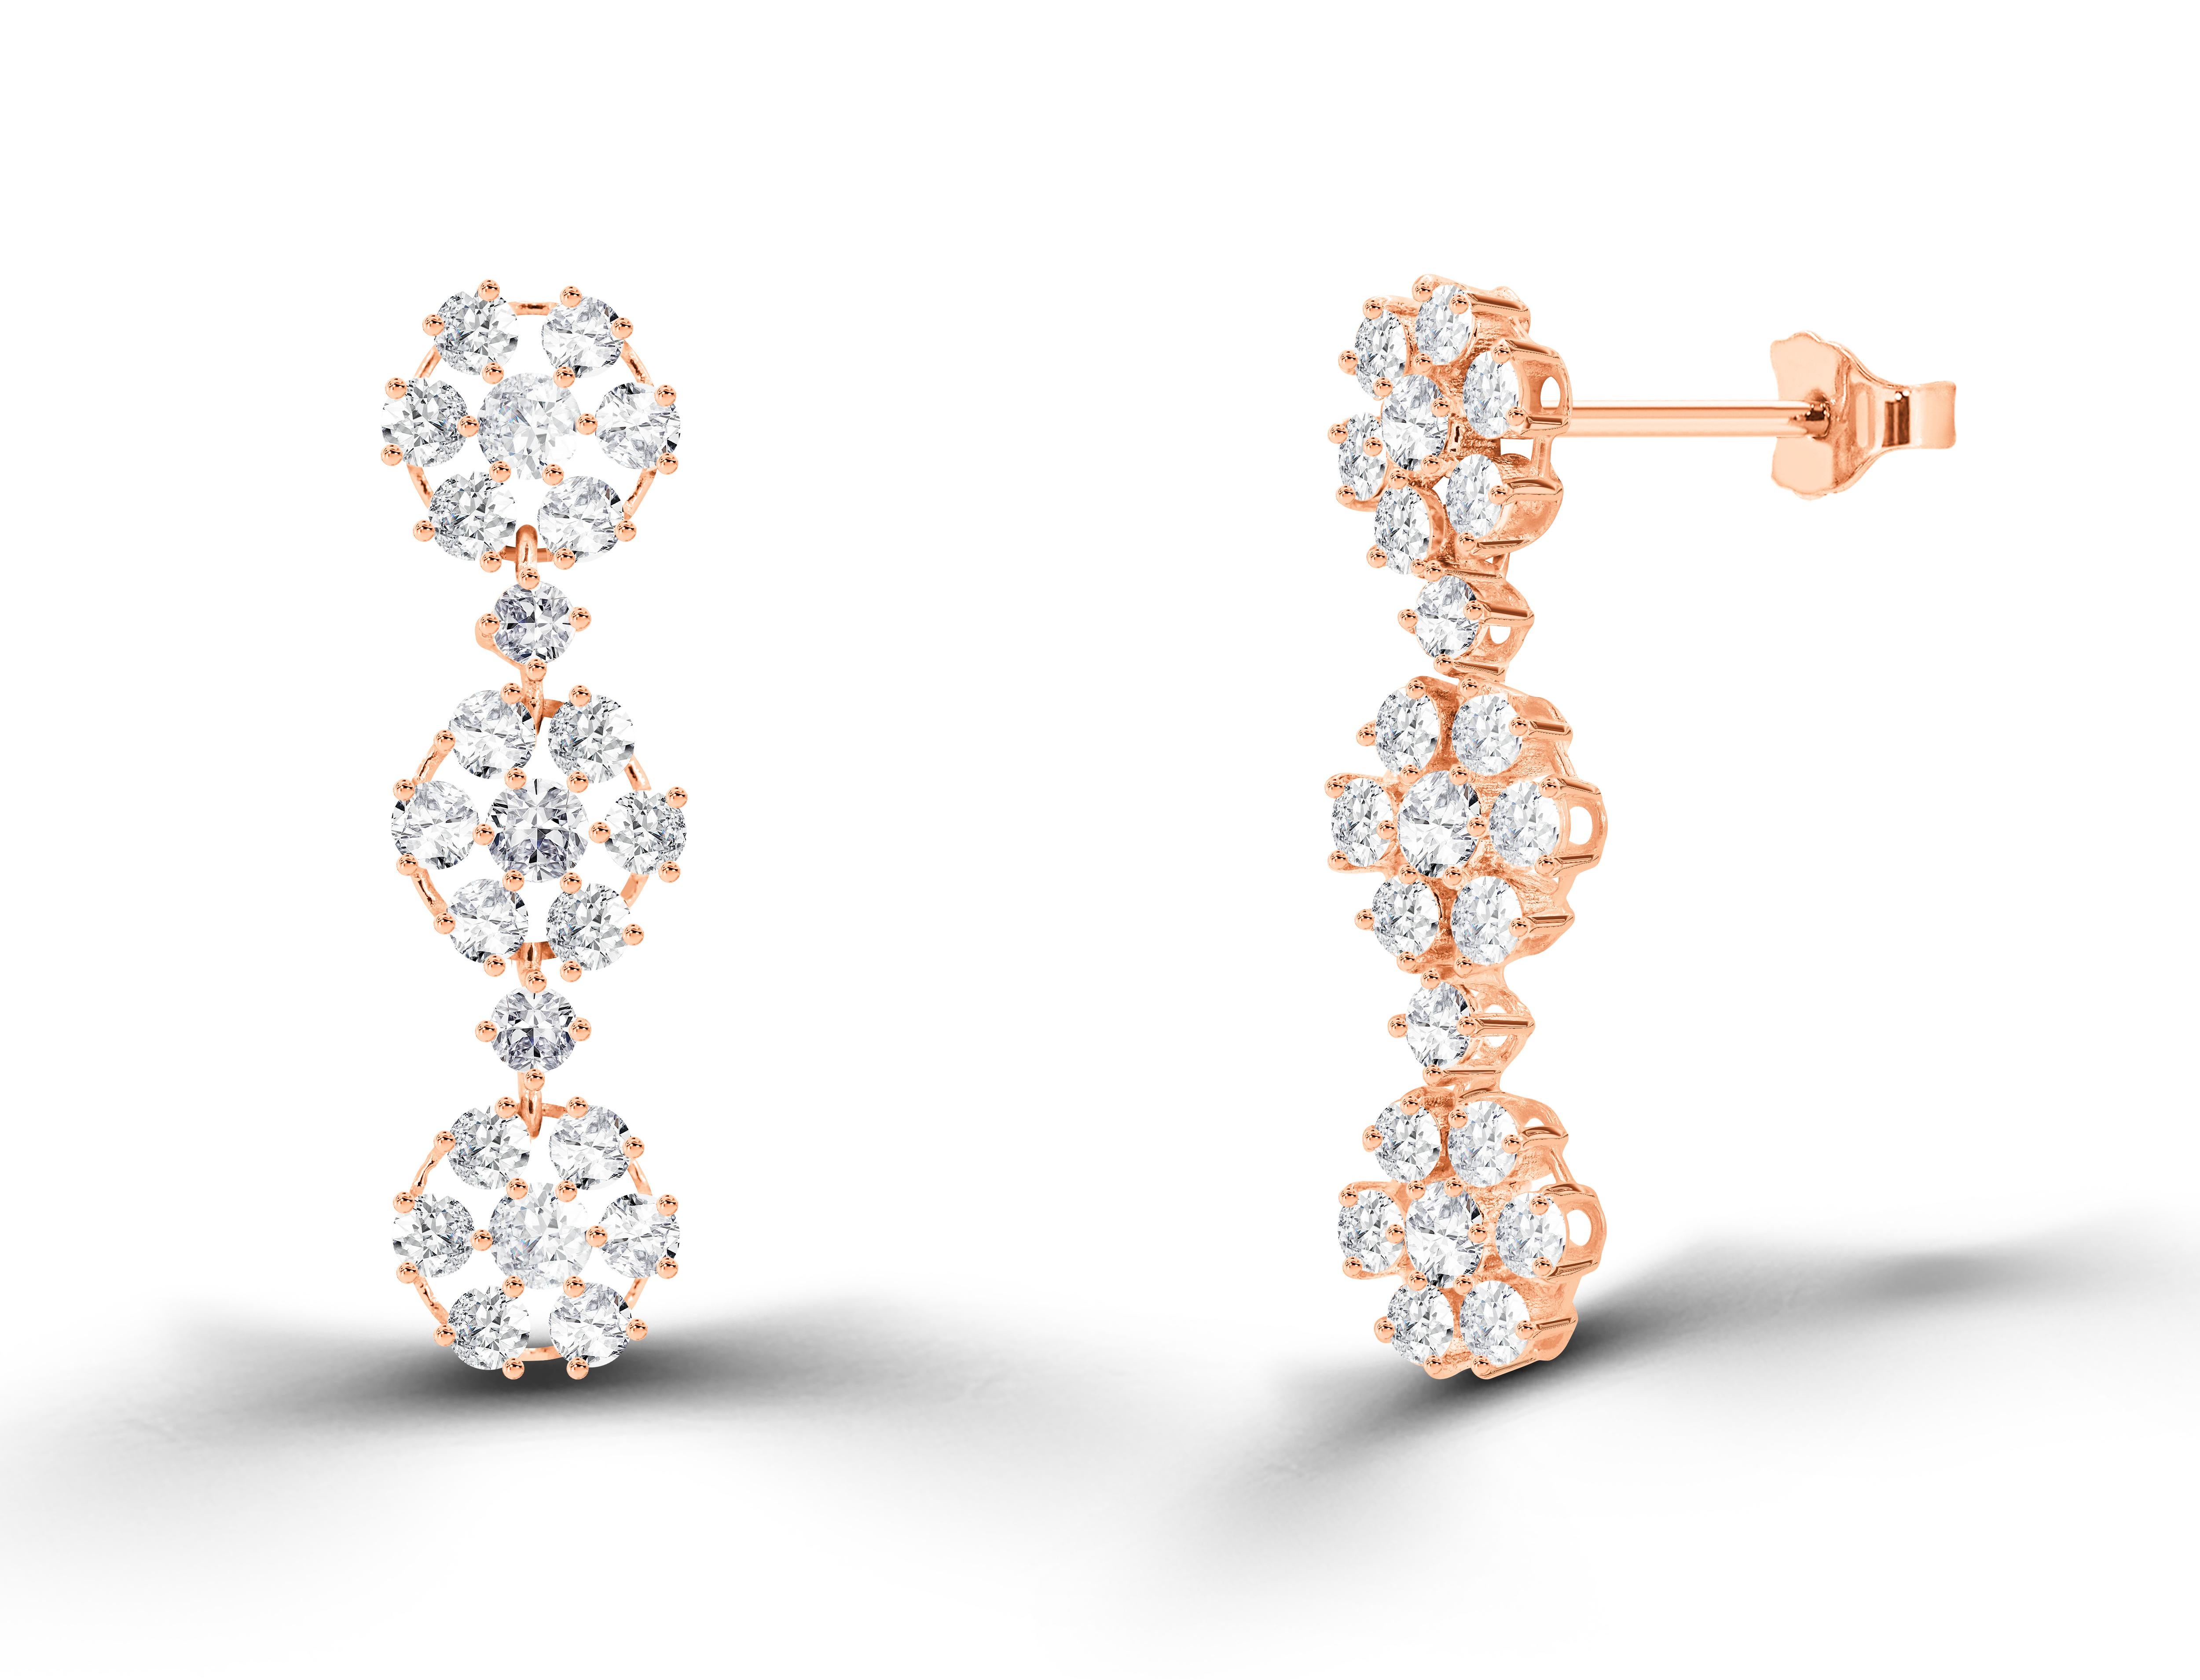 2.08 Ct Diamond Flower Drop Earrings in 14K Gold, Round Brilliant cut diamond earrings, Natural Diamond Earrings, Cluster dangle earrings, Heavy End Earrings.

Jewels By Tarry presents to you a beautiful Earring collection with natural diamonds that